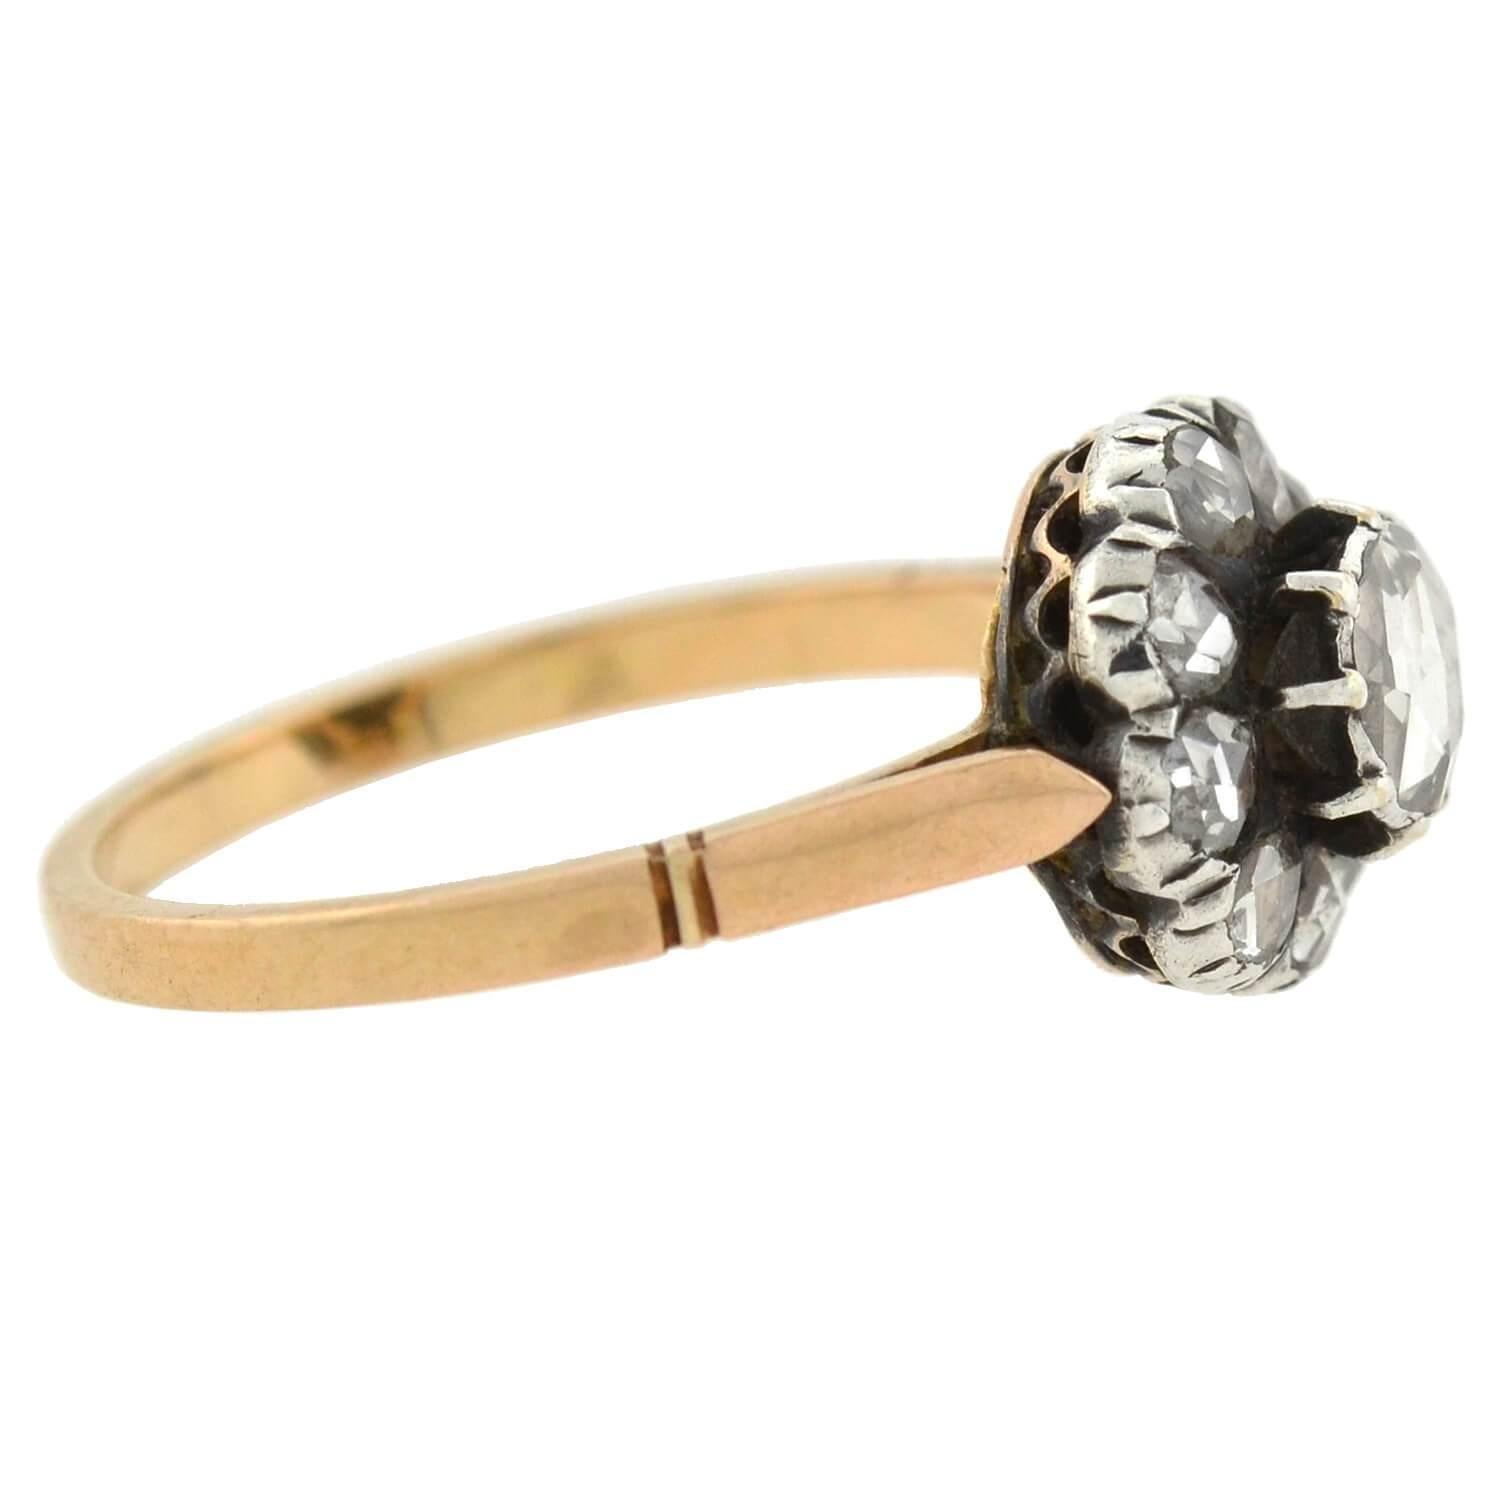 A lovely diamond cluster ring from the Victorian (ca1880) era! The mixed metals design combines a 14kt gold band with a sterling silver centerpiece, creating a lovely 2-tone effect. Decorating the centerpiece is a cluster of 10 old Rose Cut